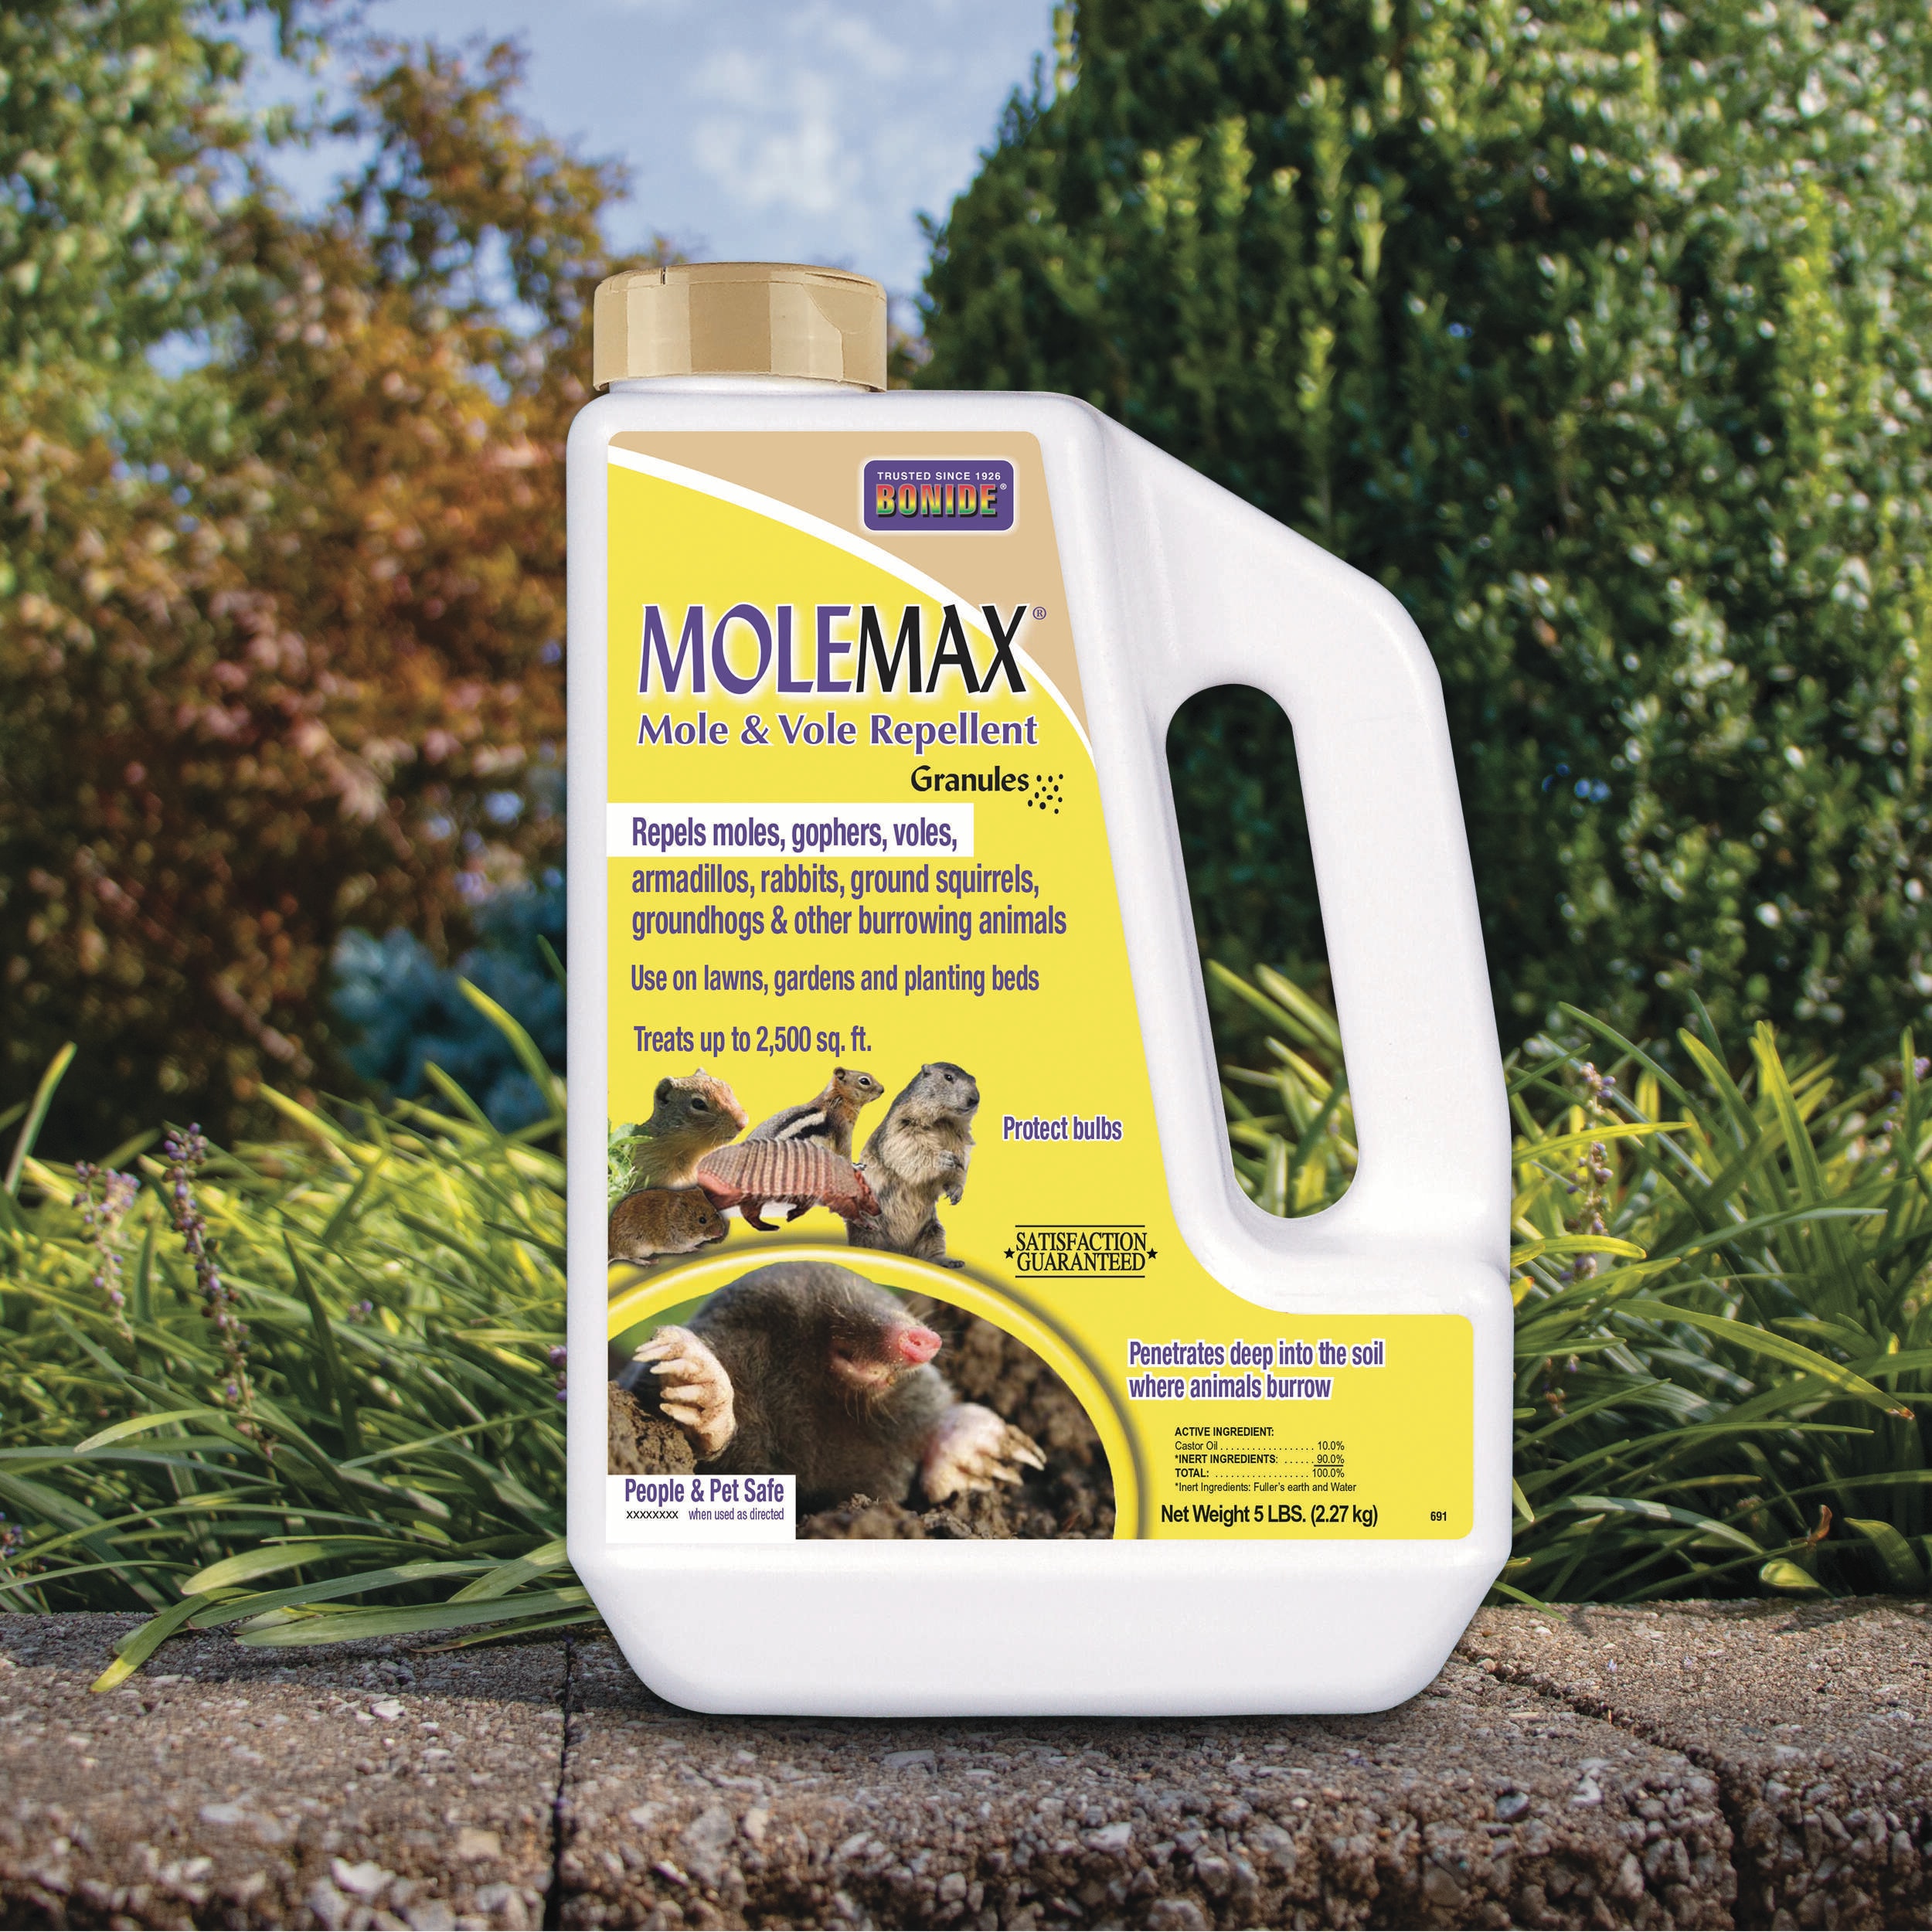 Bonide MoleMax 5-lb Natural Pest Control Granules for Moles, Gophers,  Rabbits - Repellent for Lawns & Gardens - Safe for Kids & Pets in the  Animal & Rodent Control department at